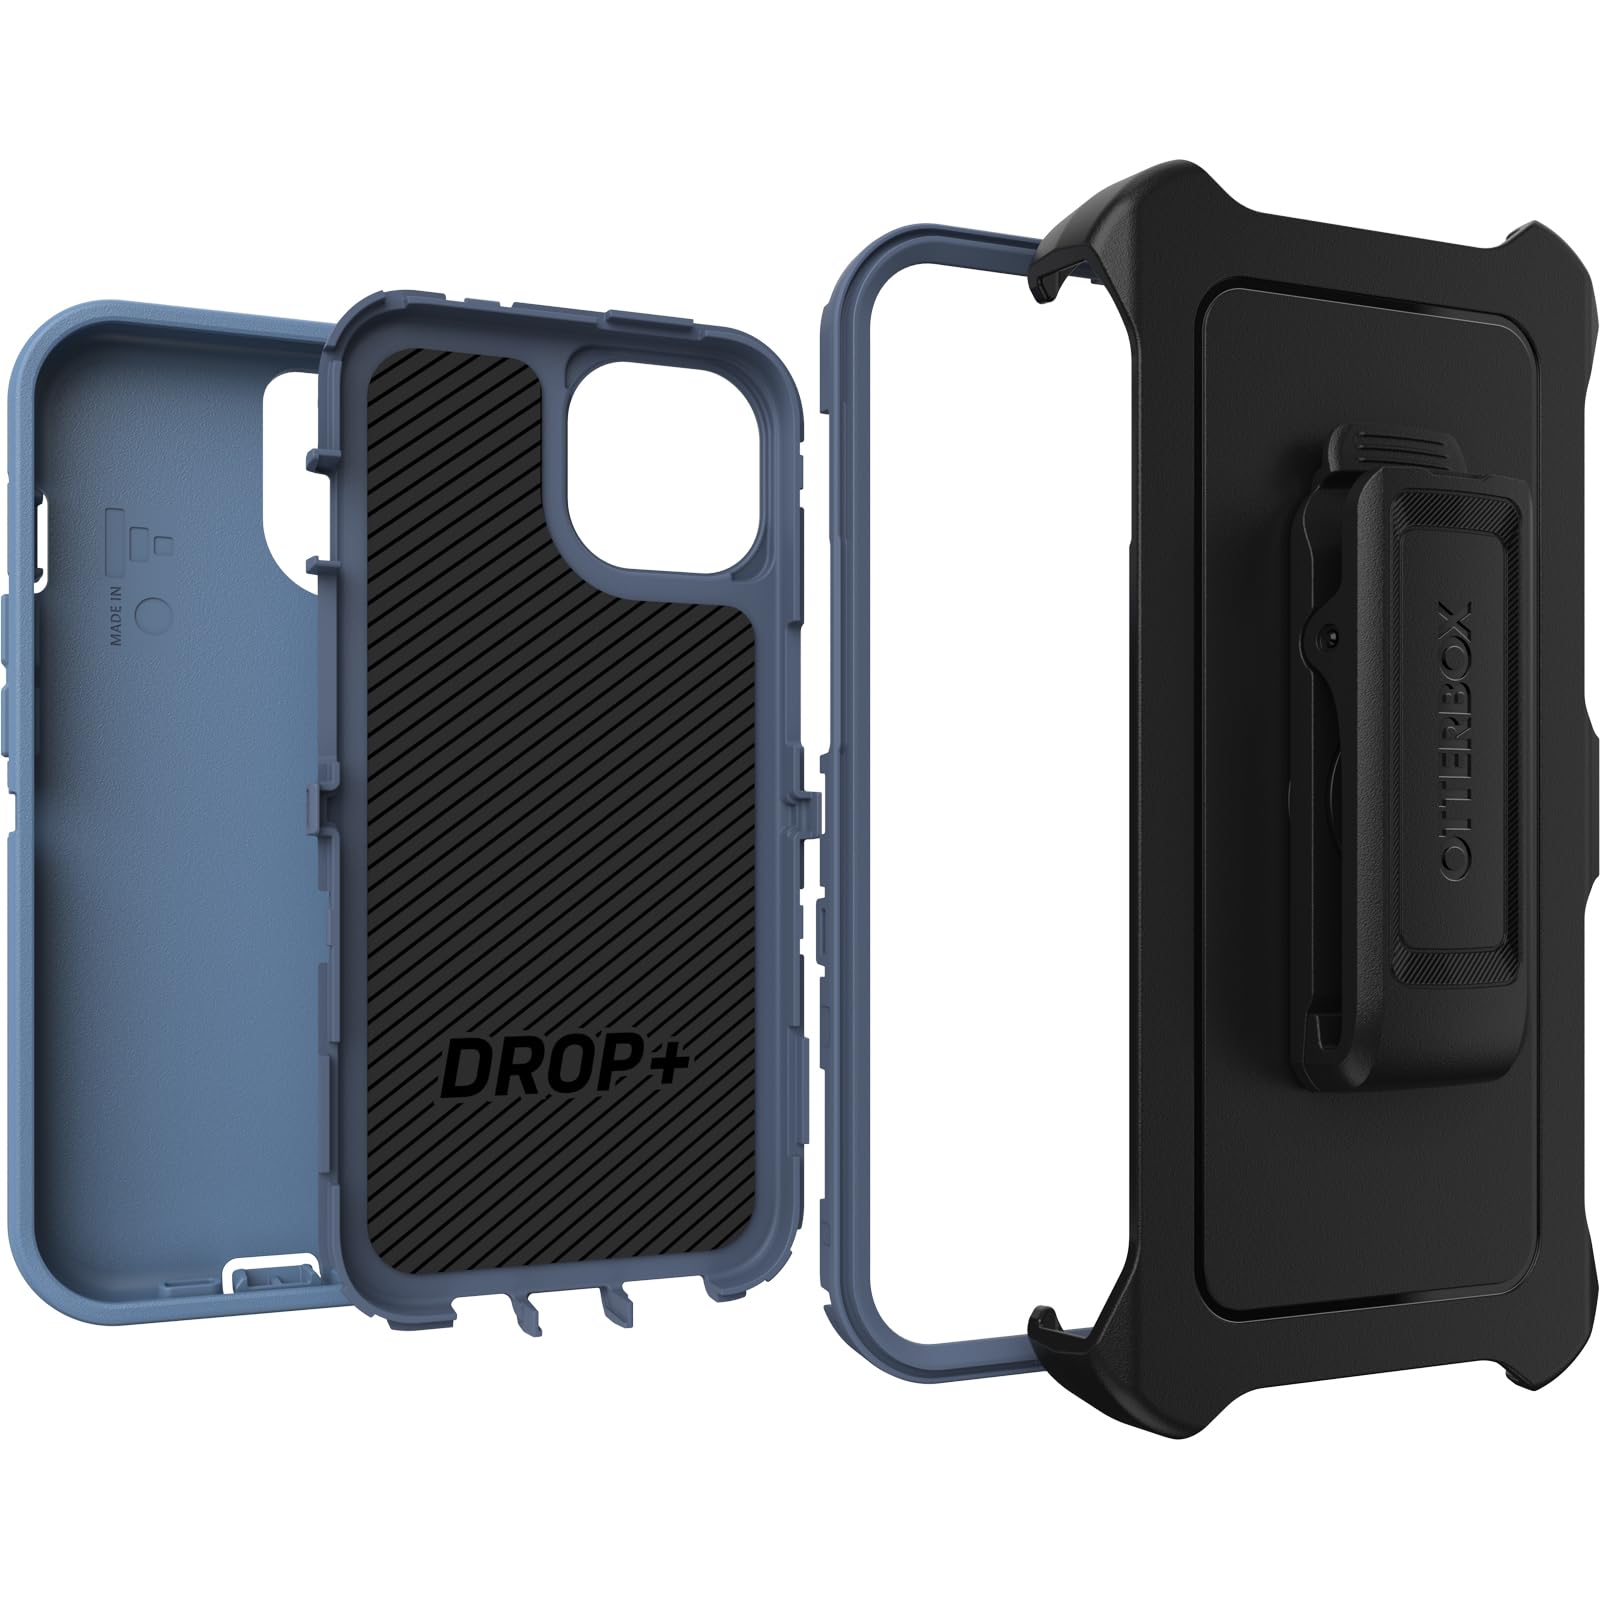 OtterBox iPhone 15, iPhone 14, and iPhone 13 Defender Series Case - BABY BLUE JEANS (Blue), screenless, rugged & durable, with port protection, includes holster clip kickstand